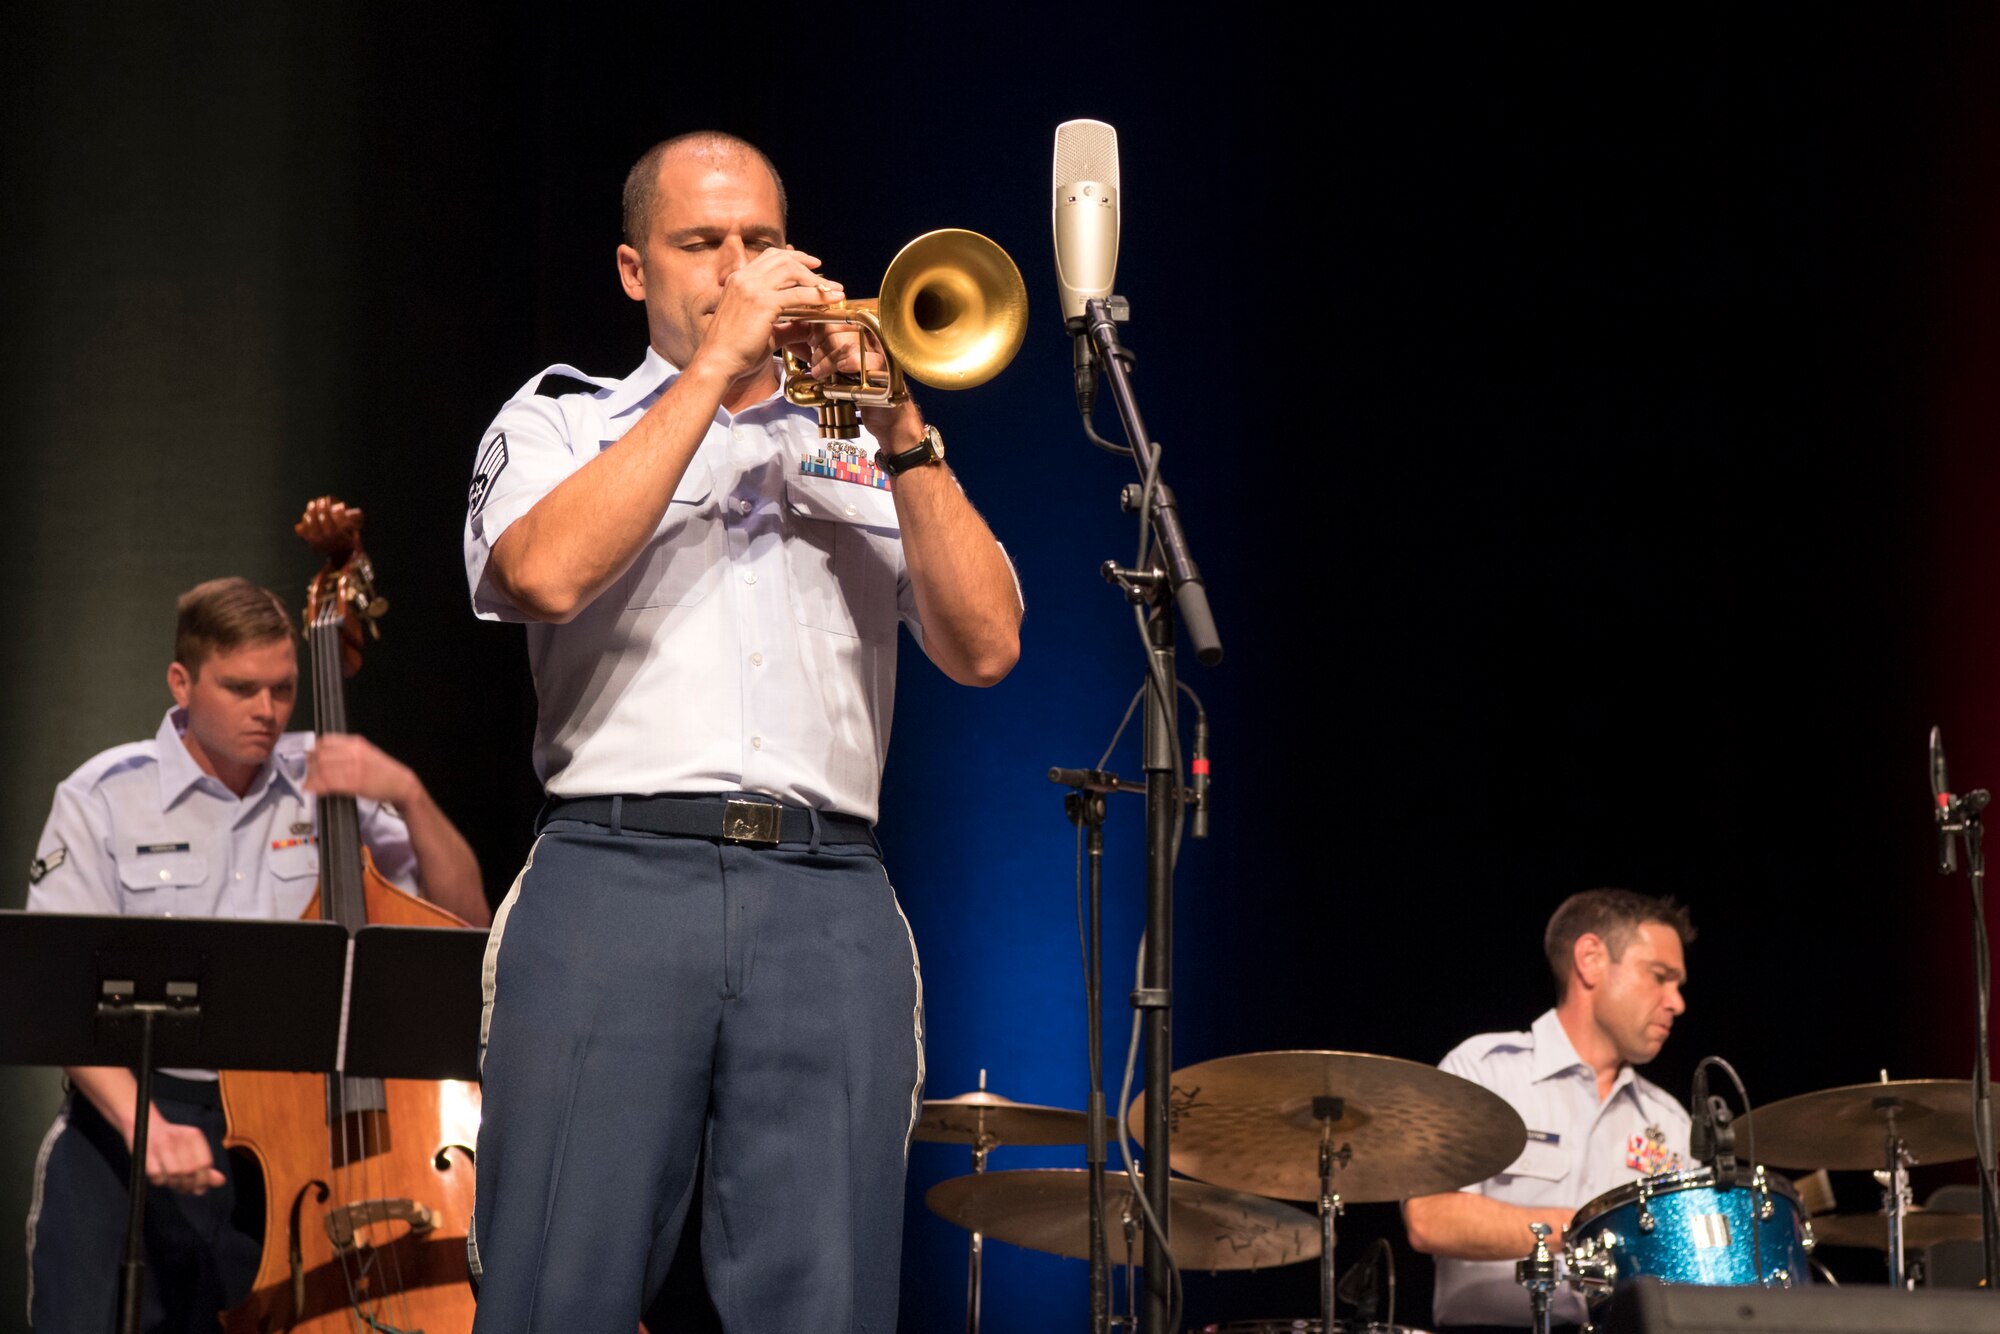 Staff Sgt. Benjamin Paille, U.S. Air Force Band of Mid-America Shades of Blue Jazz Ensemble trumpet player, performs a solo during a concert at the Honeywell Center in Wabash, Indiana Sept. 10, 2019. Paille was a featured soloist in the Broadway show BLAST!, and has performed with Christian Mcbride, Robert Glasper, Cyrus Chestnut, Kevin Mohogany, Warren Wolf, Jason Moran, Eric Reed, and many others. (U.S. Air Force photo/Master Sgt. Ben Mota)